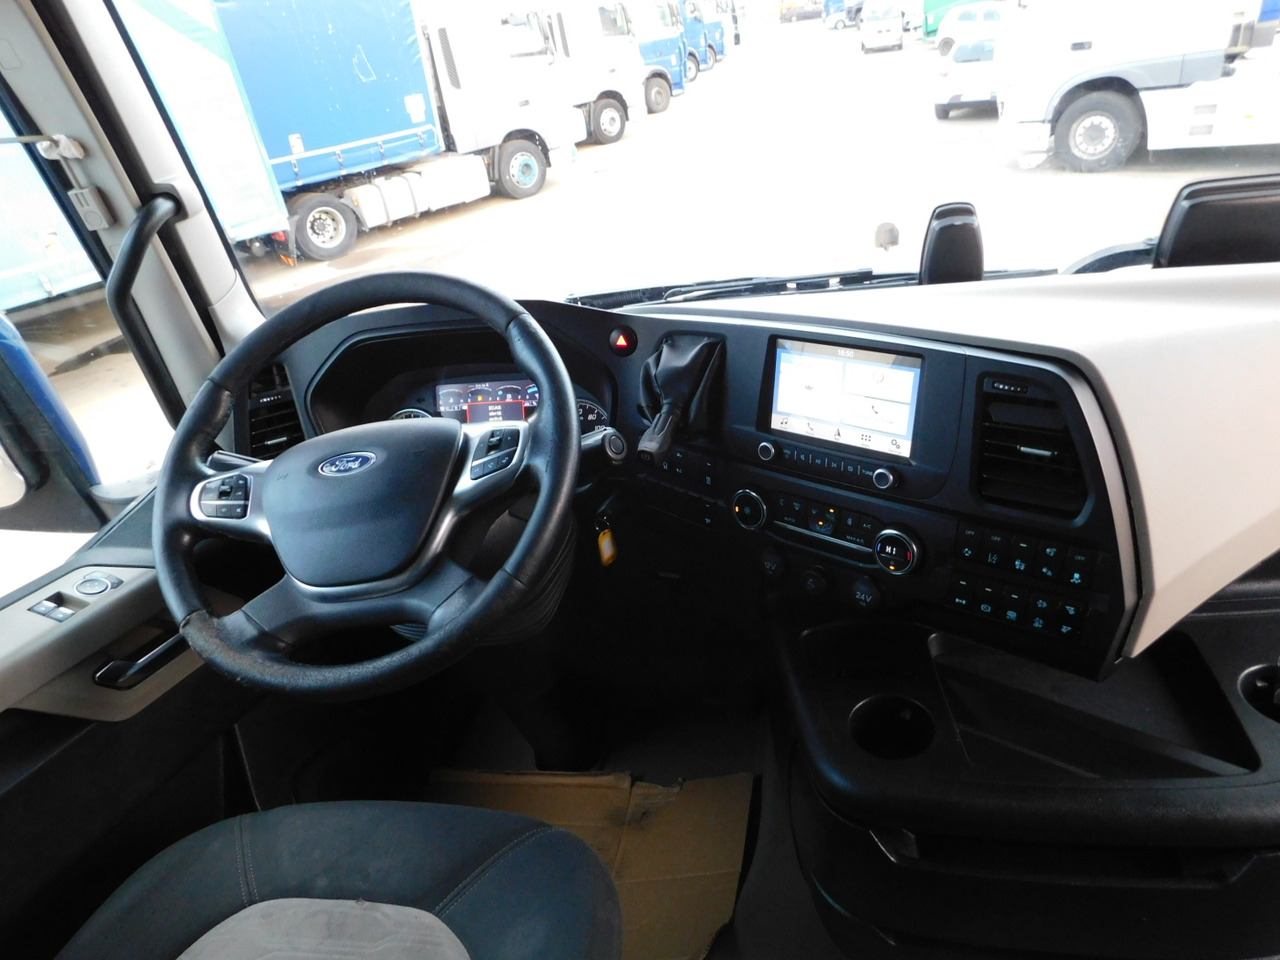 Tracteur routier Ford F max ll 4x2 scab e6 12s2620: photos 7